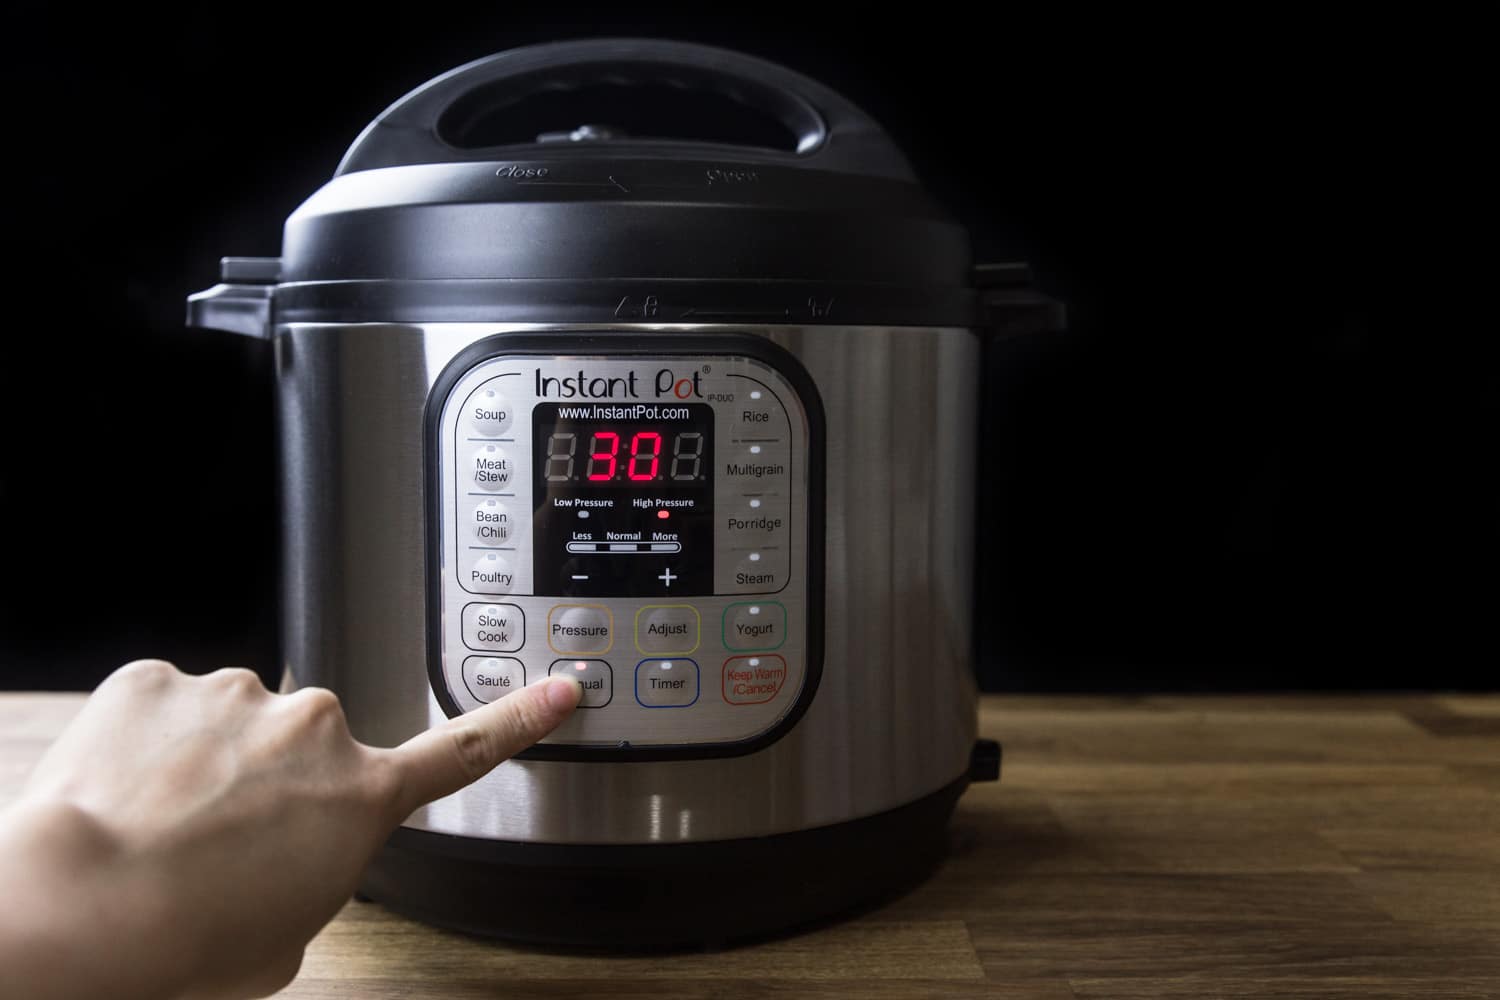 How Hot Does An Electric Pressure Cooker Get